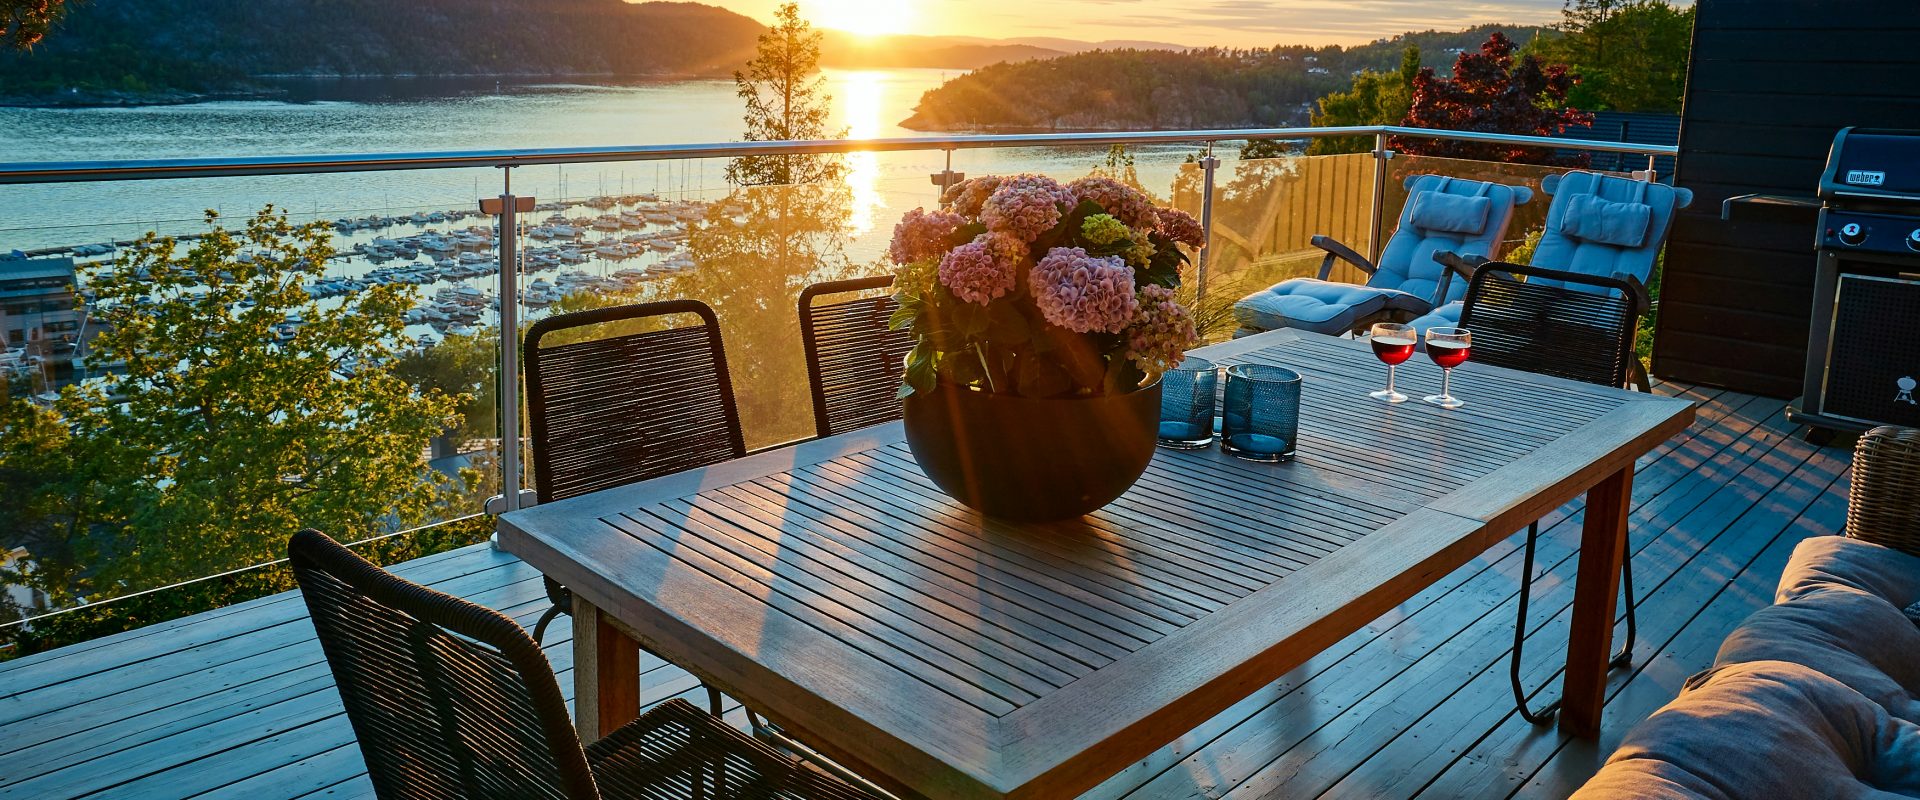 How to waterproof your outdoor furniture this Autumn